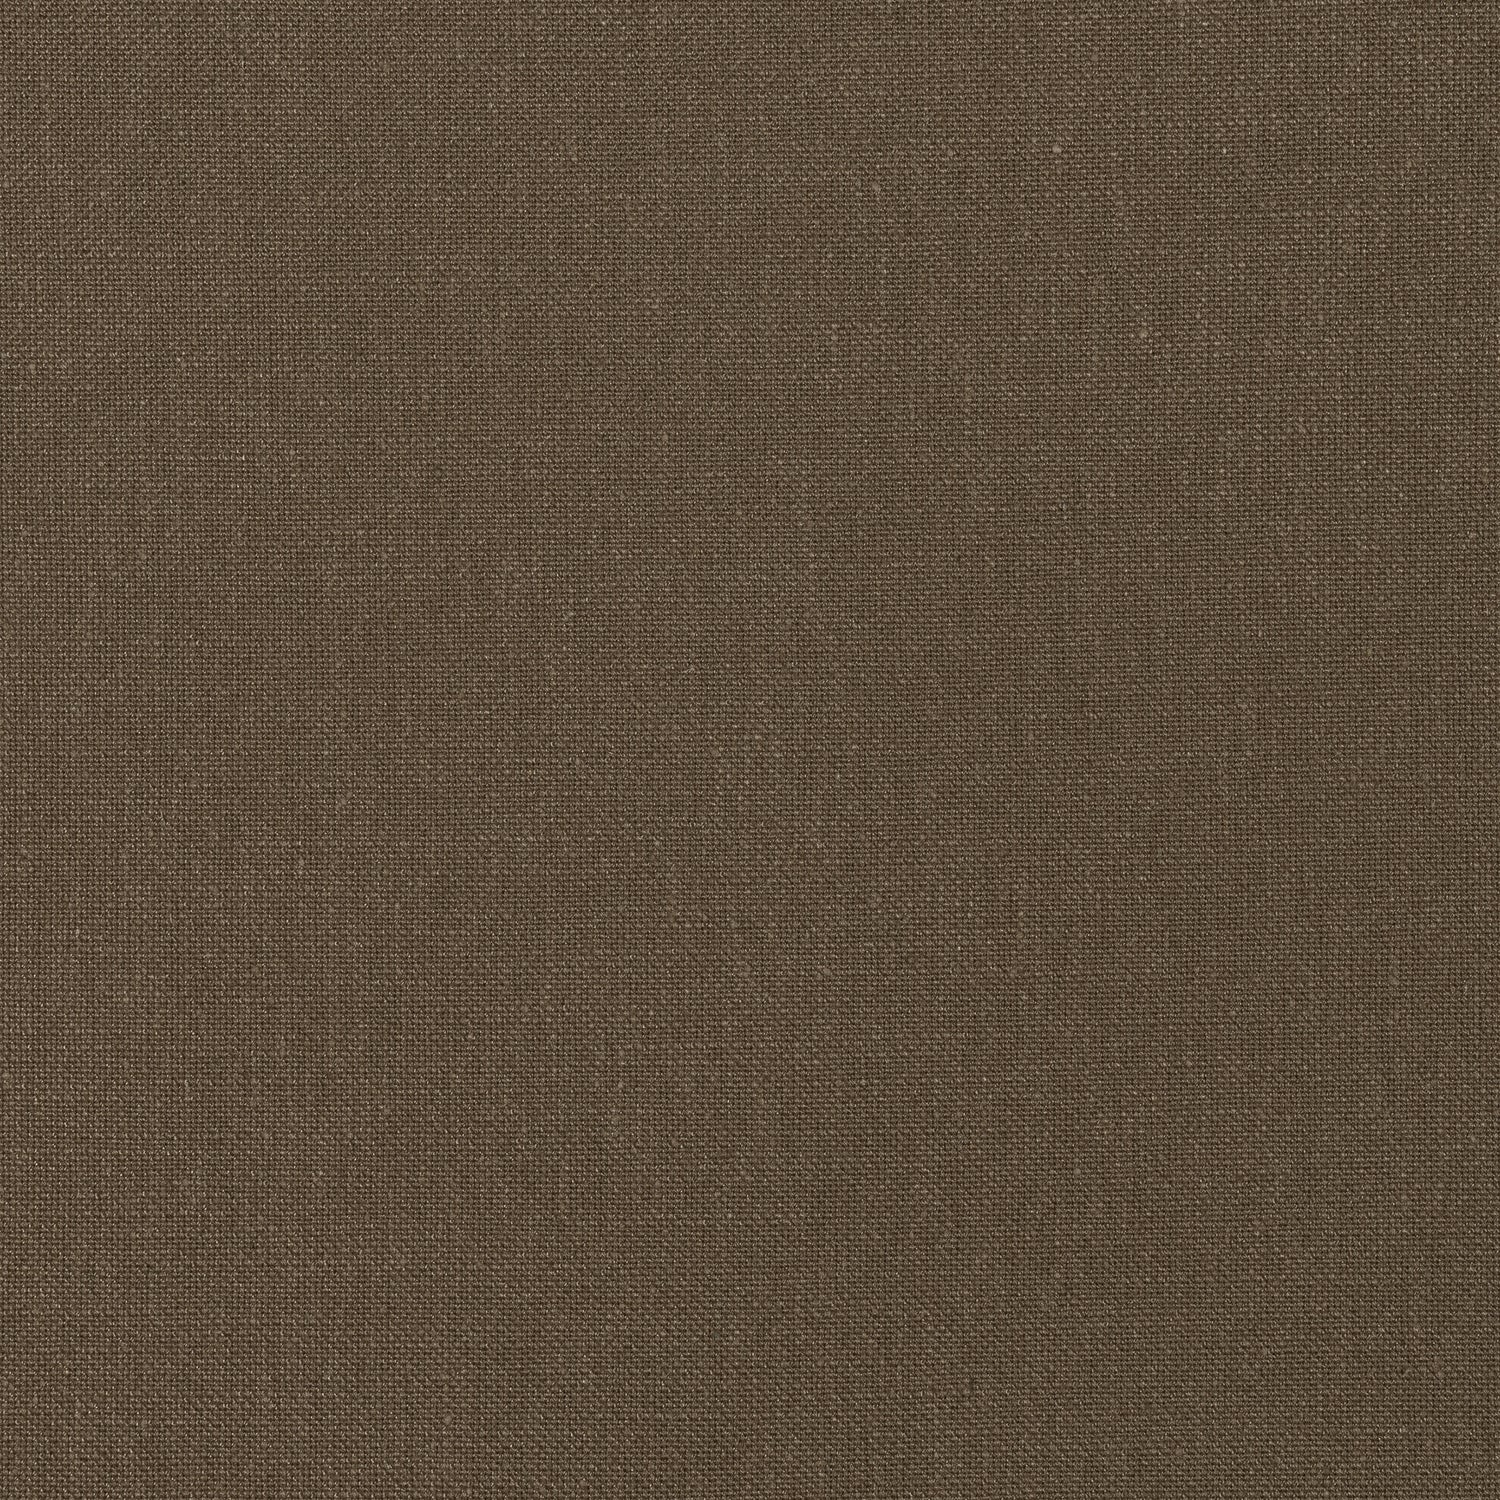 Palisade Linen fabric in chocolate color - pattern number FWW7661 - by Thibaut in the Palisades collection